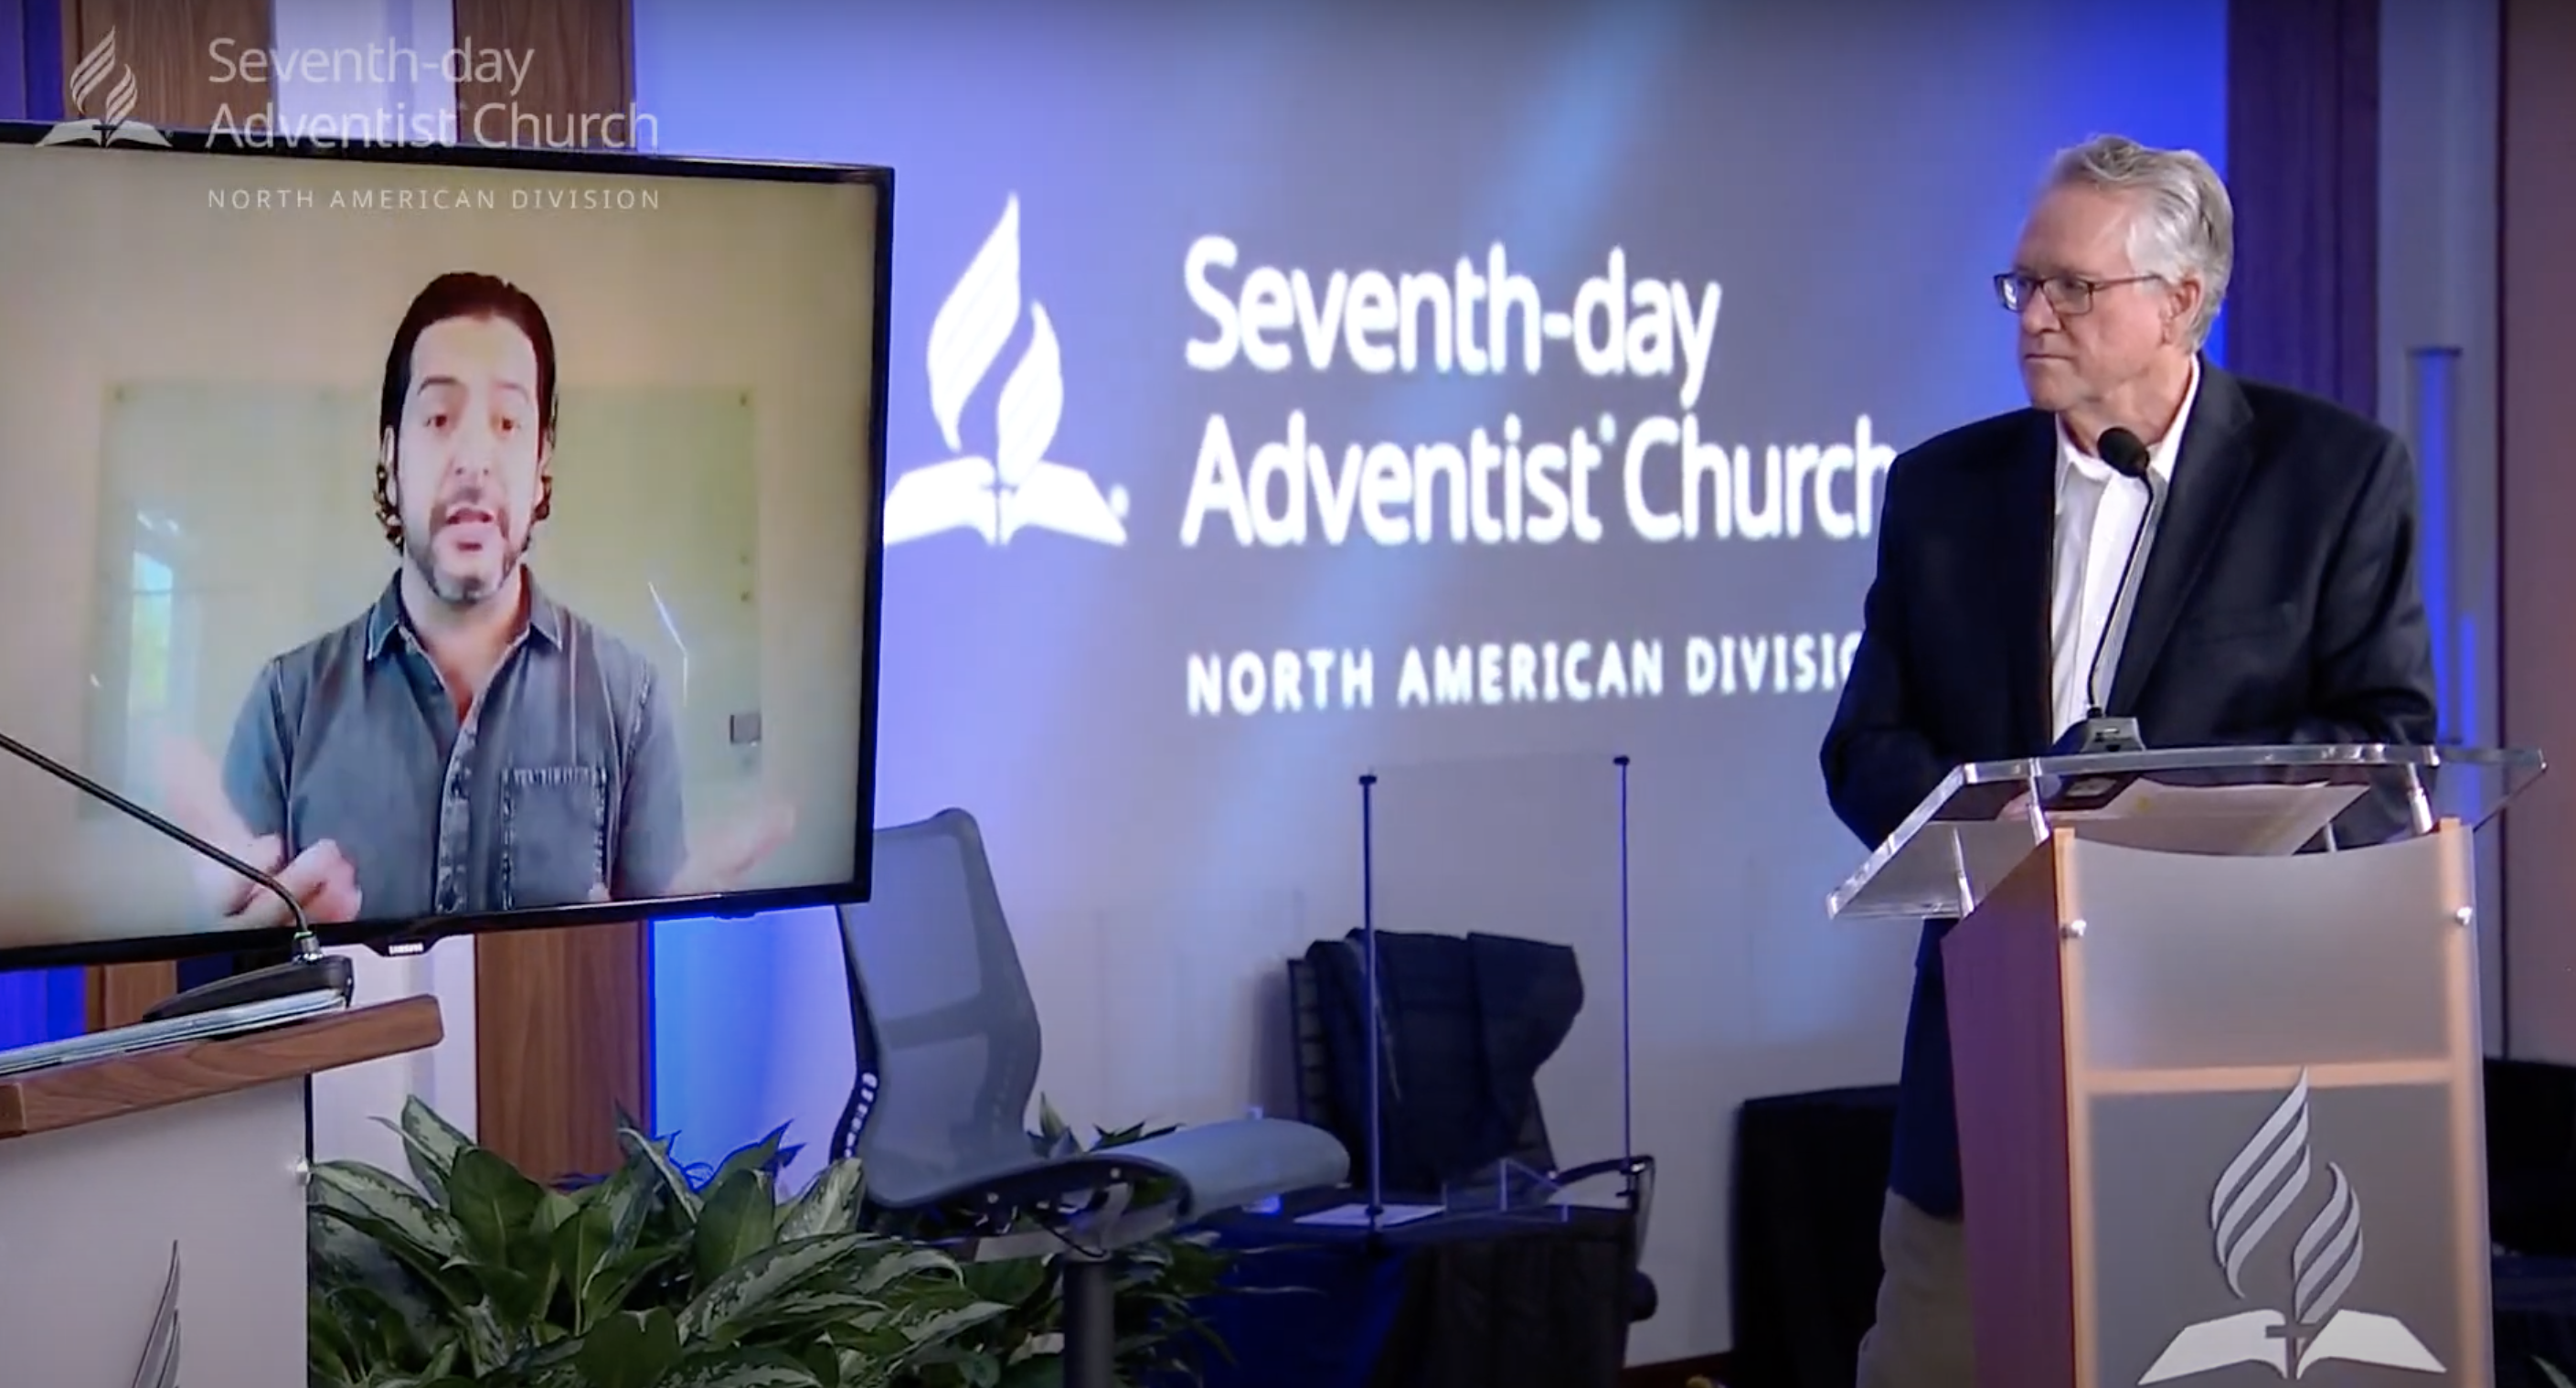 Manny Arteaga, pastor of the KalĒo Seventh-day Adventist Church in Arcadia, California, shares how he and his friends created the Bible study “Tacology” small-group. Photo: Screen capture from livestream on YouTube. 